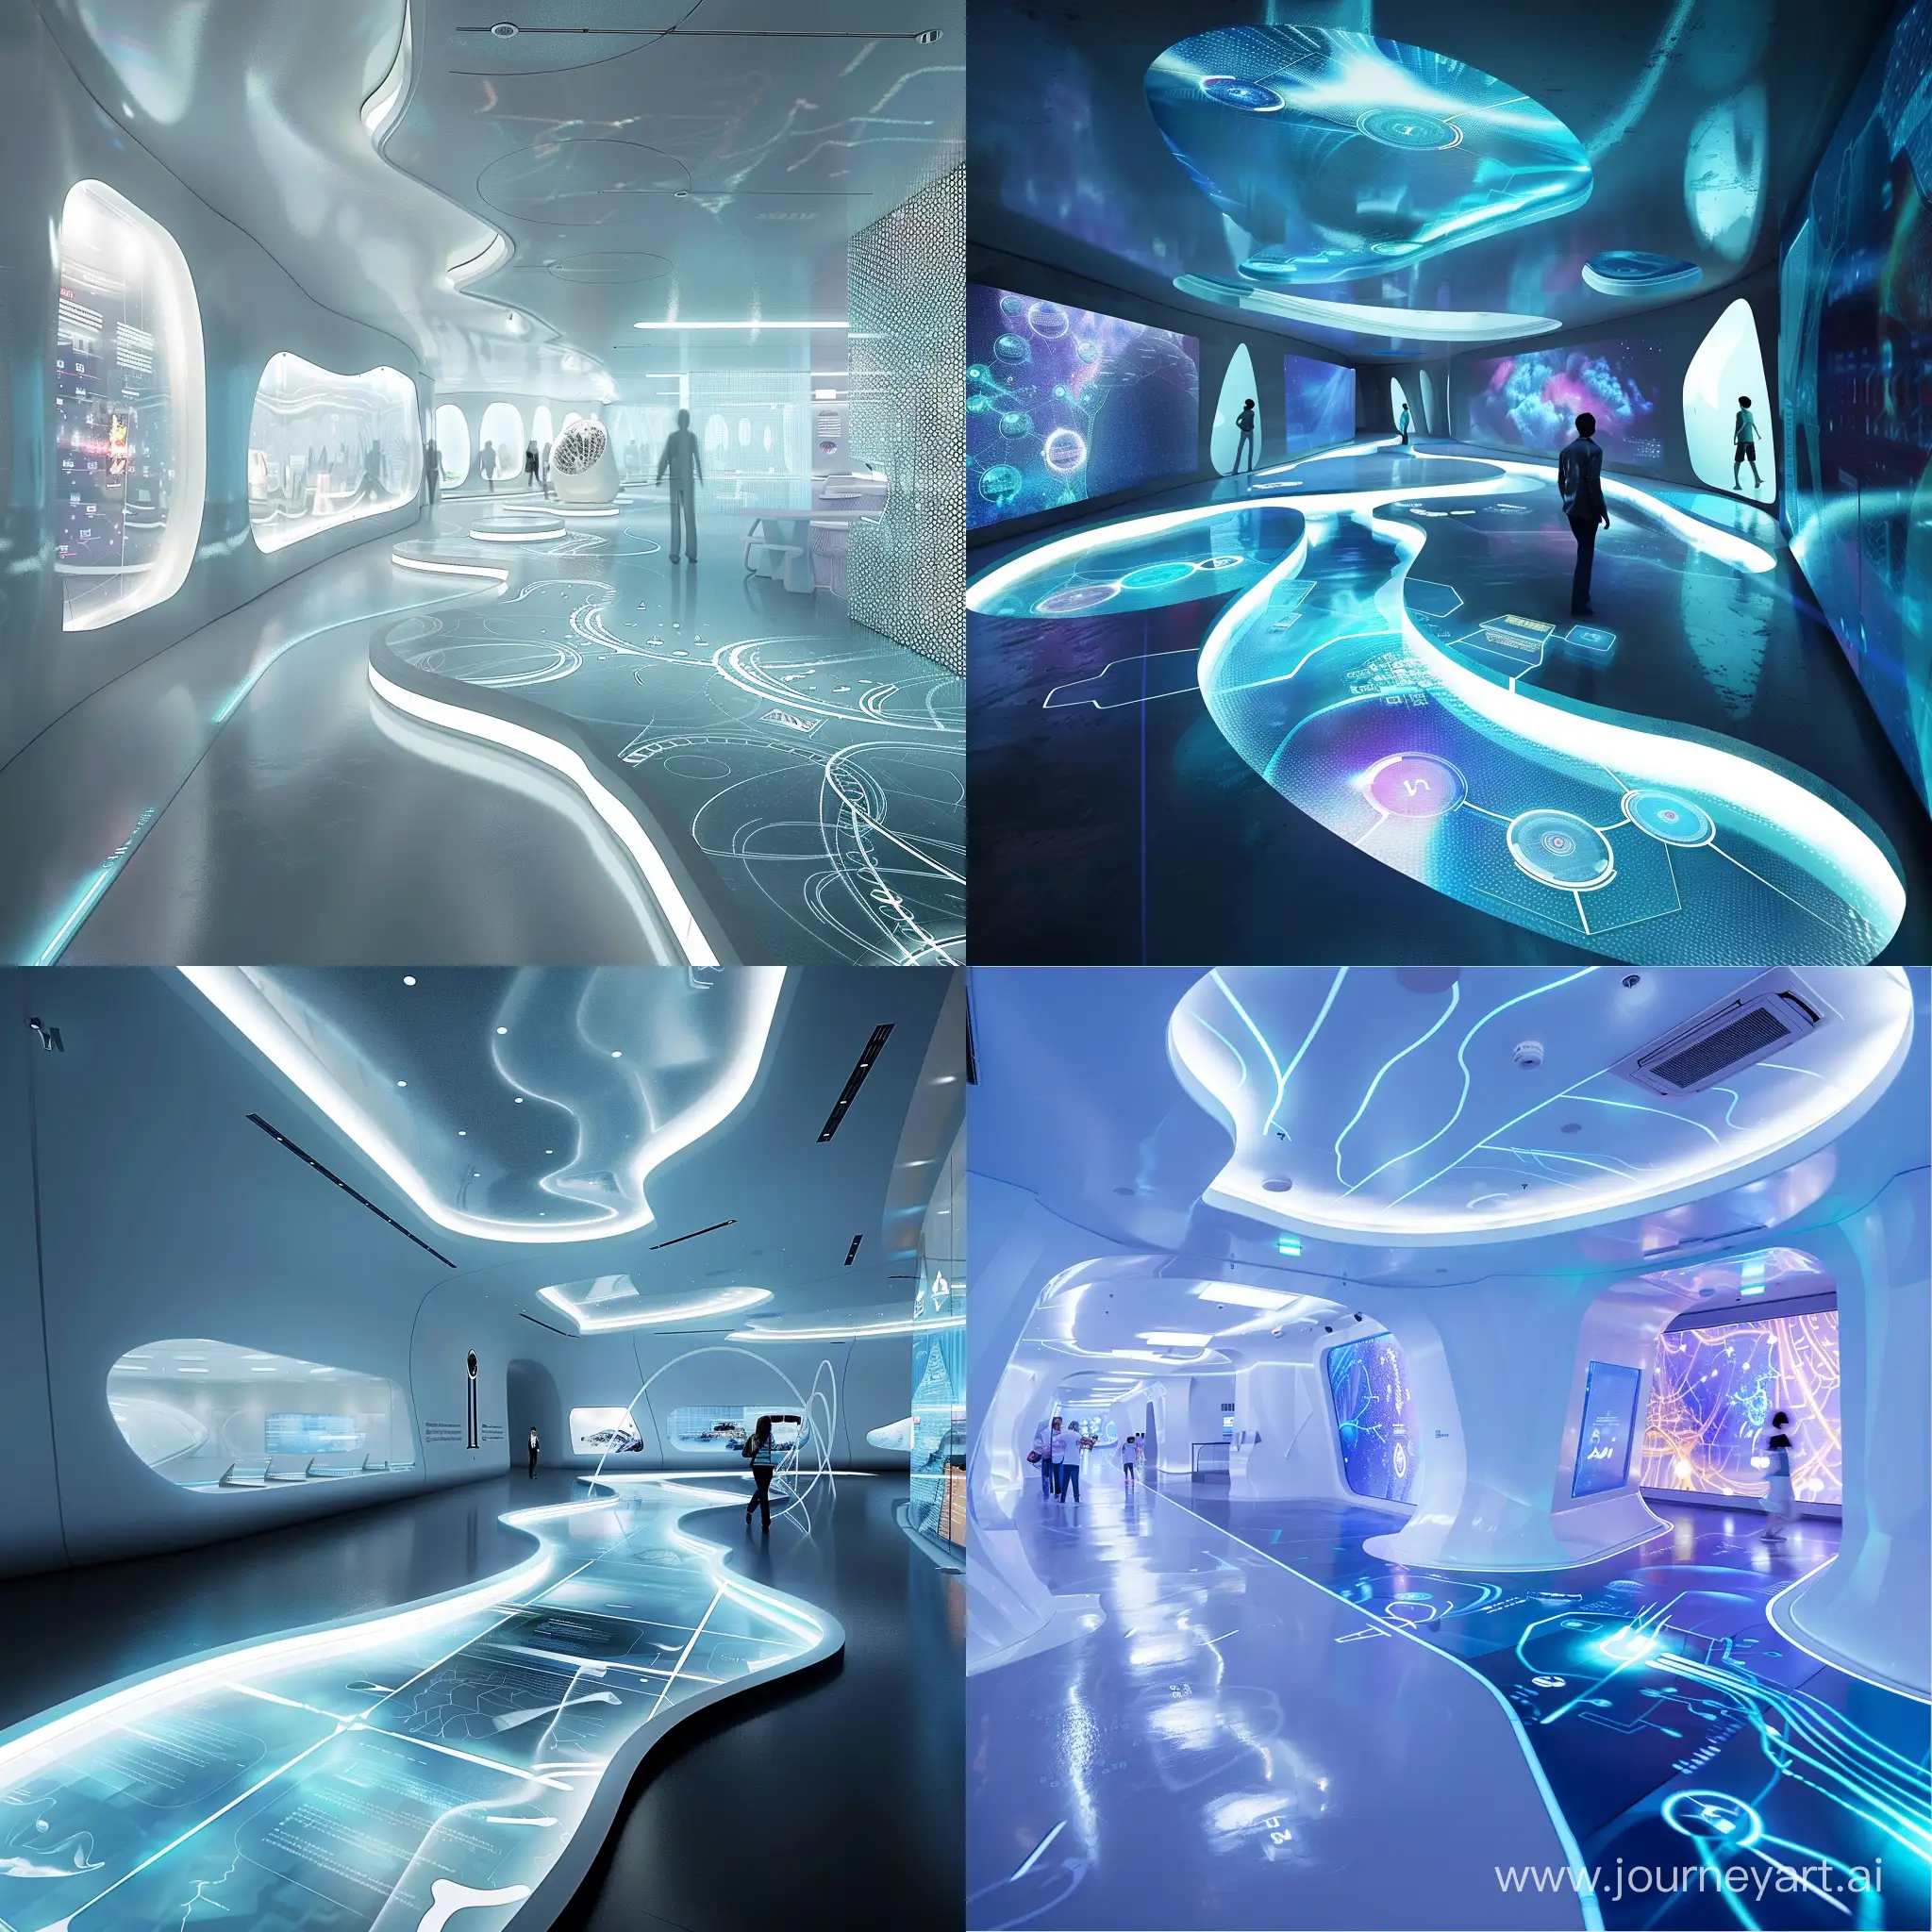 Futuristic-Interactive-Museum-with-Immersive-Floors-and-Walls